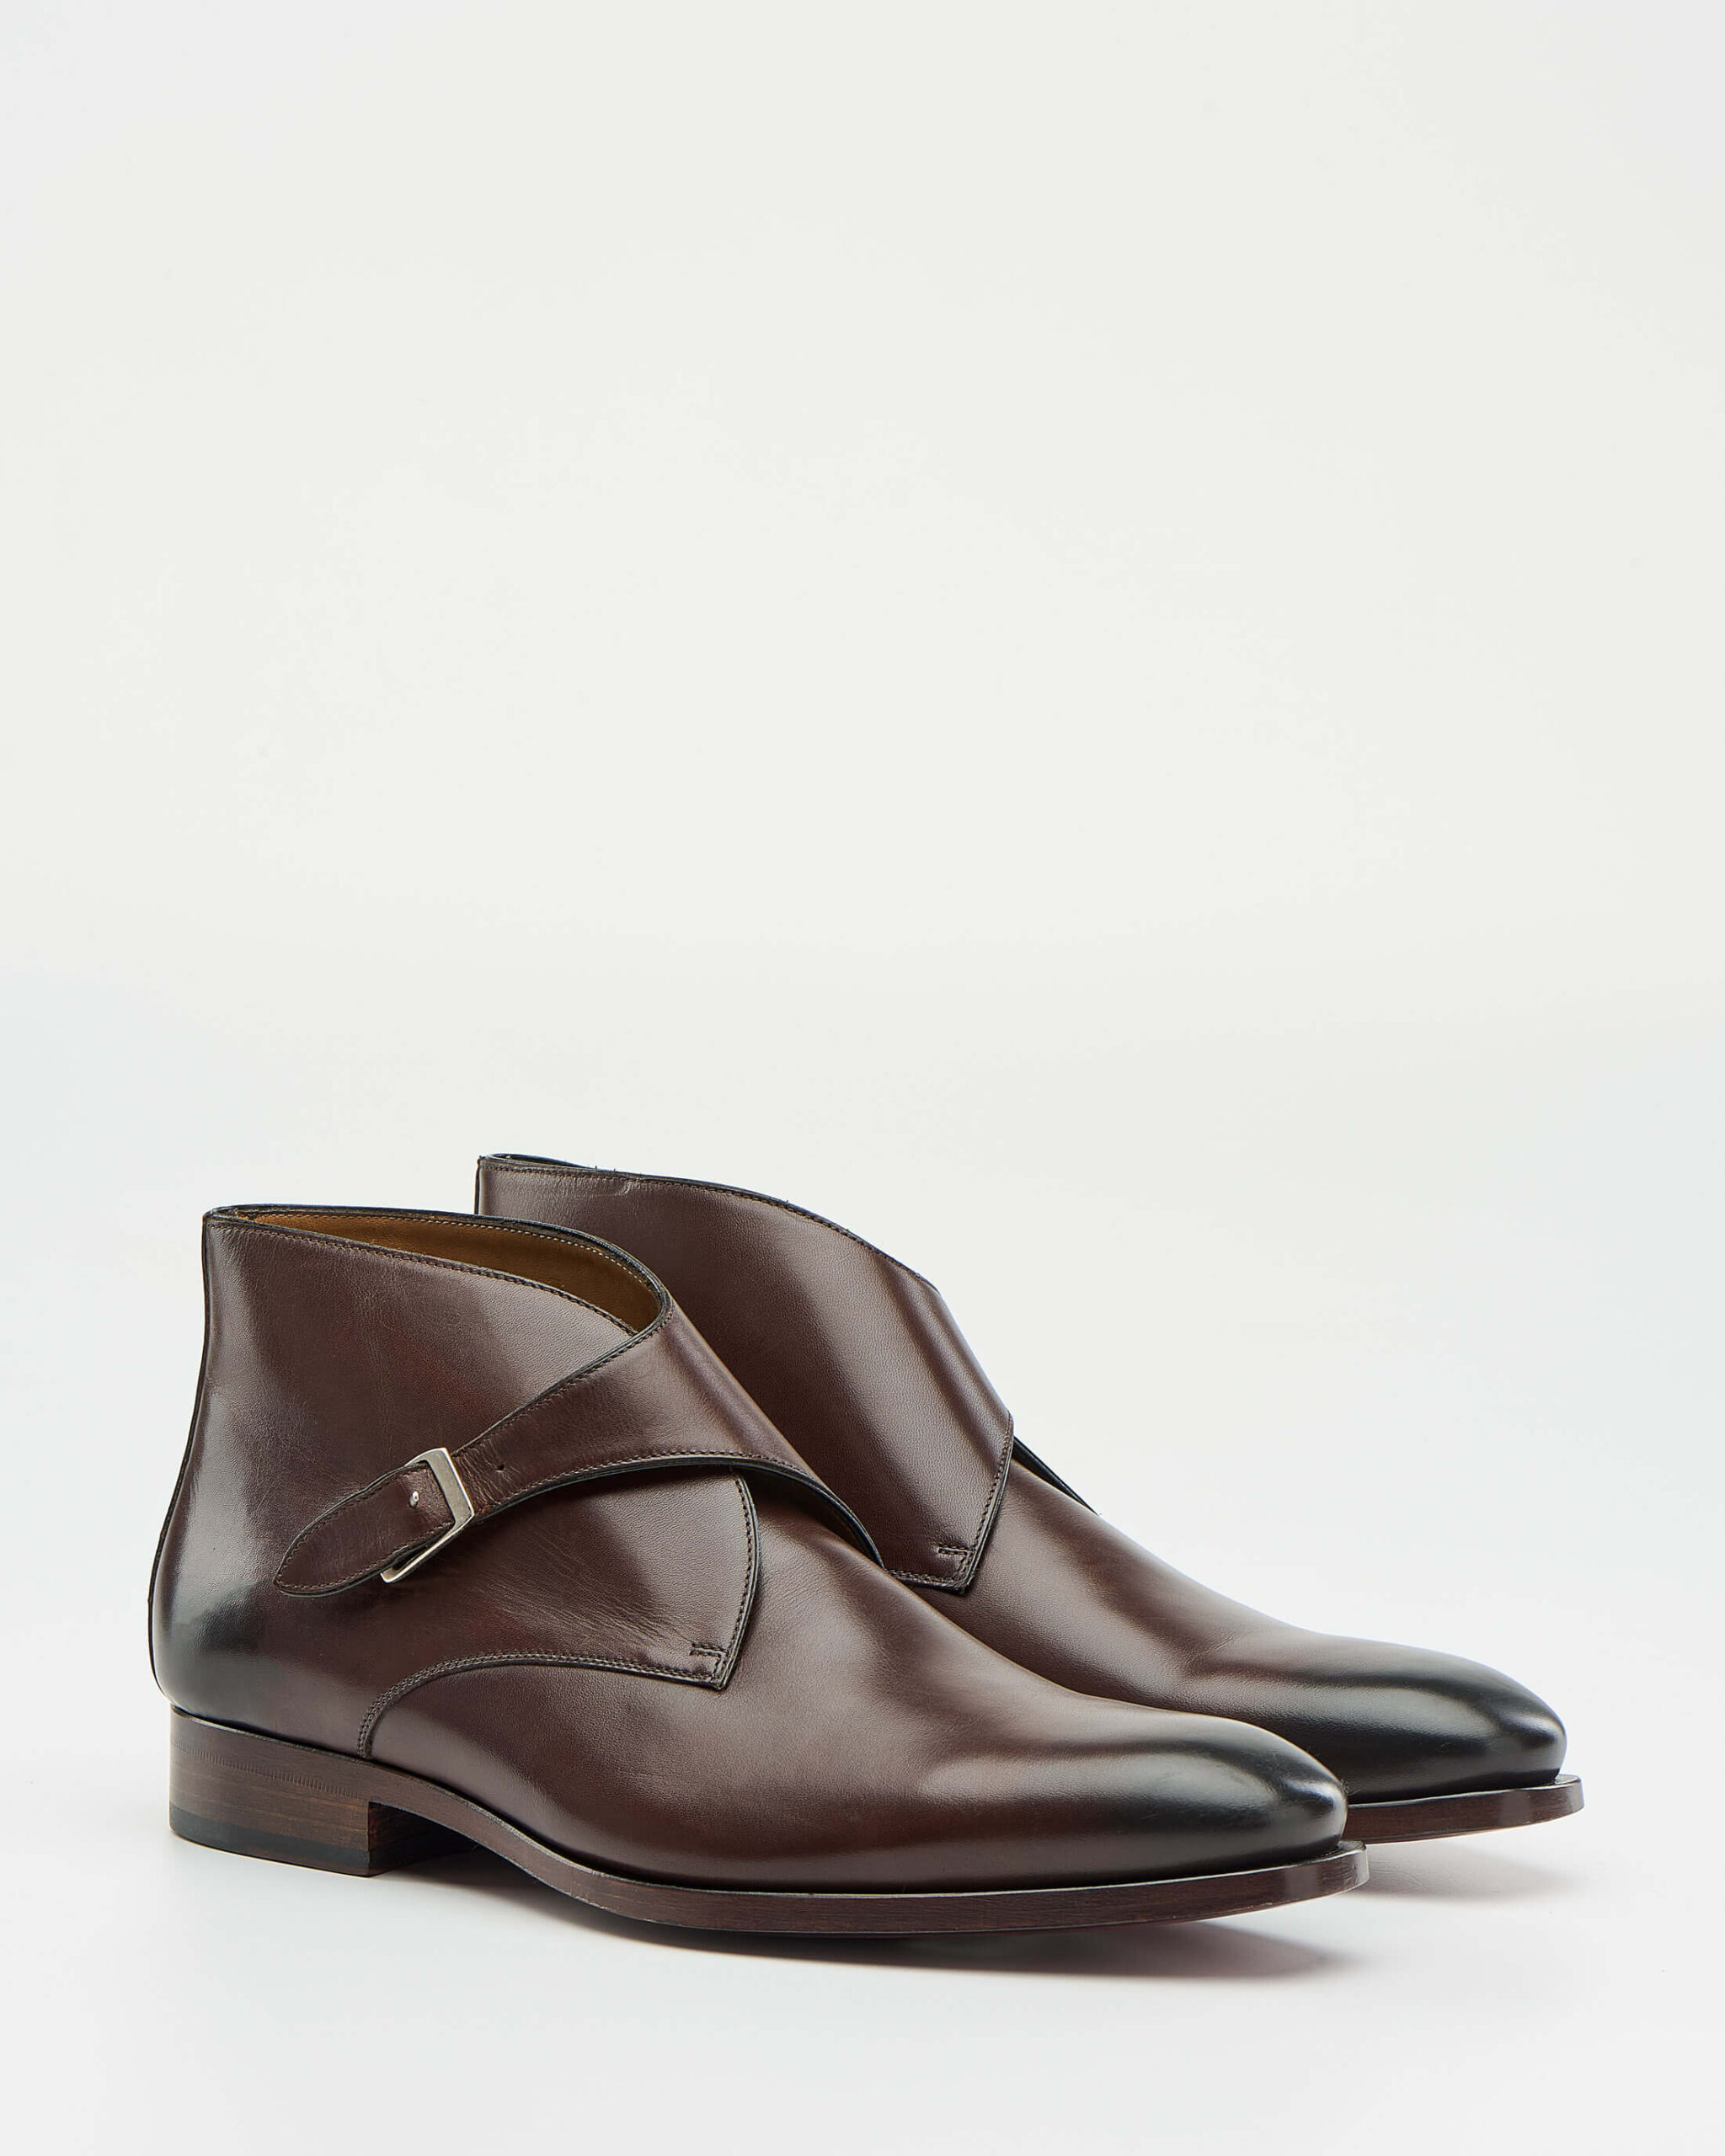 Luis Onofre Portuguese Shoes FW23 – Enigma Collection – H6110_01 – Prince Brown-2